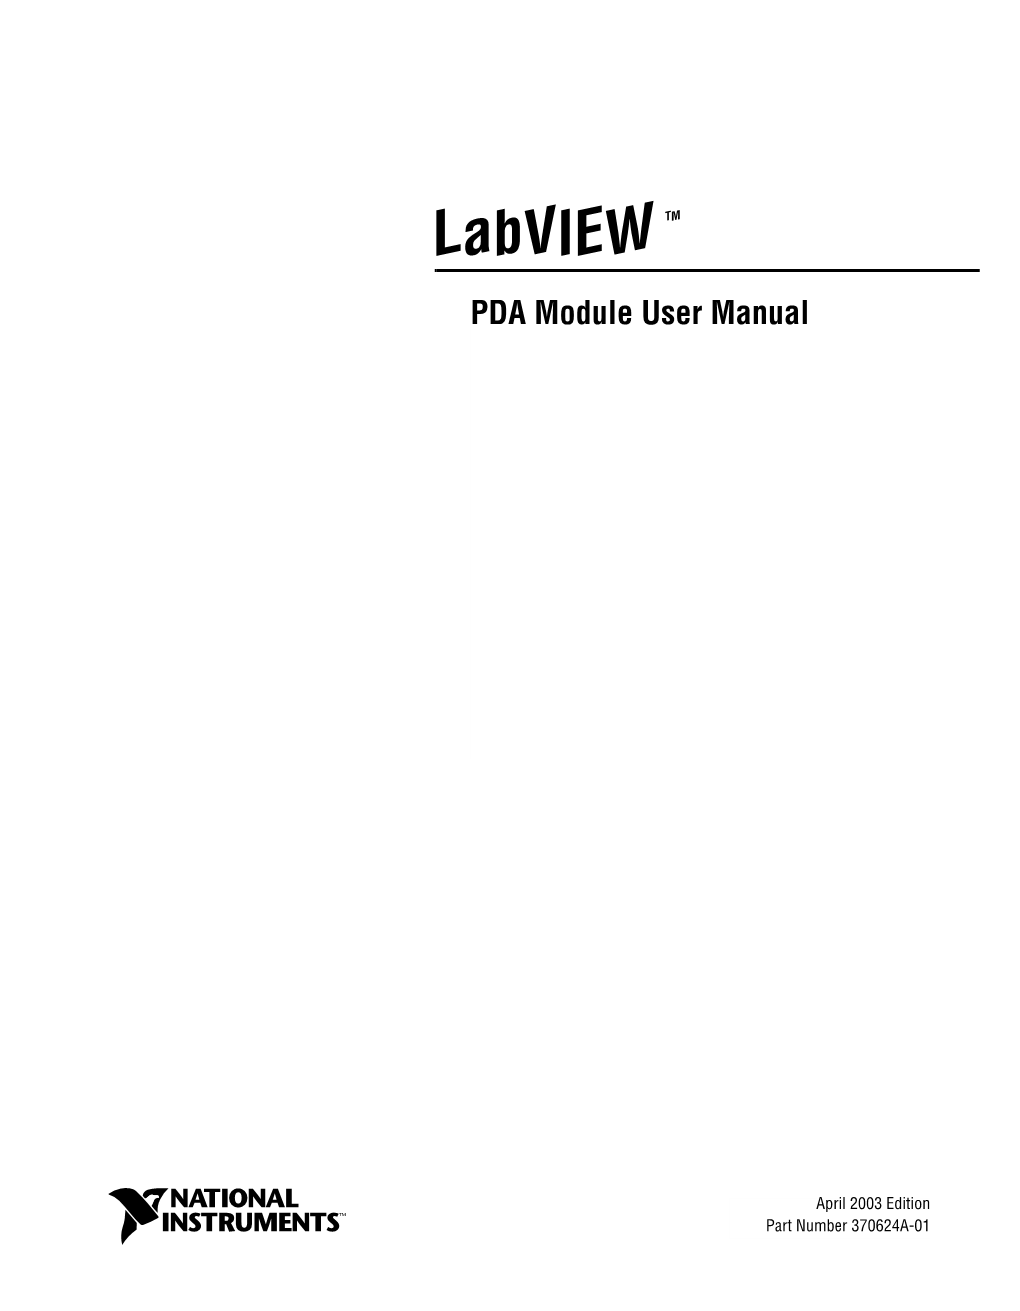 Archived: Labview PDA Module User Manual